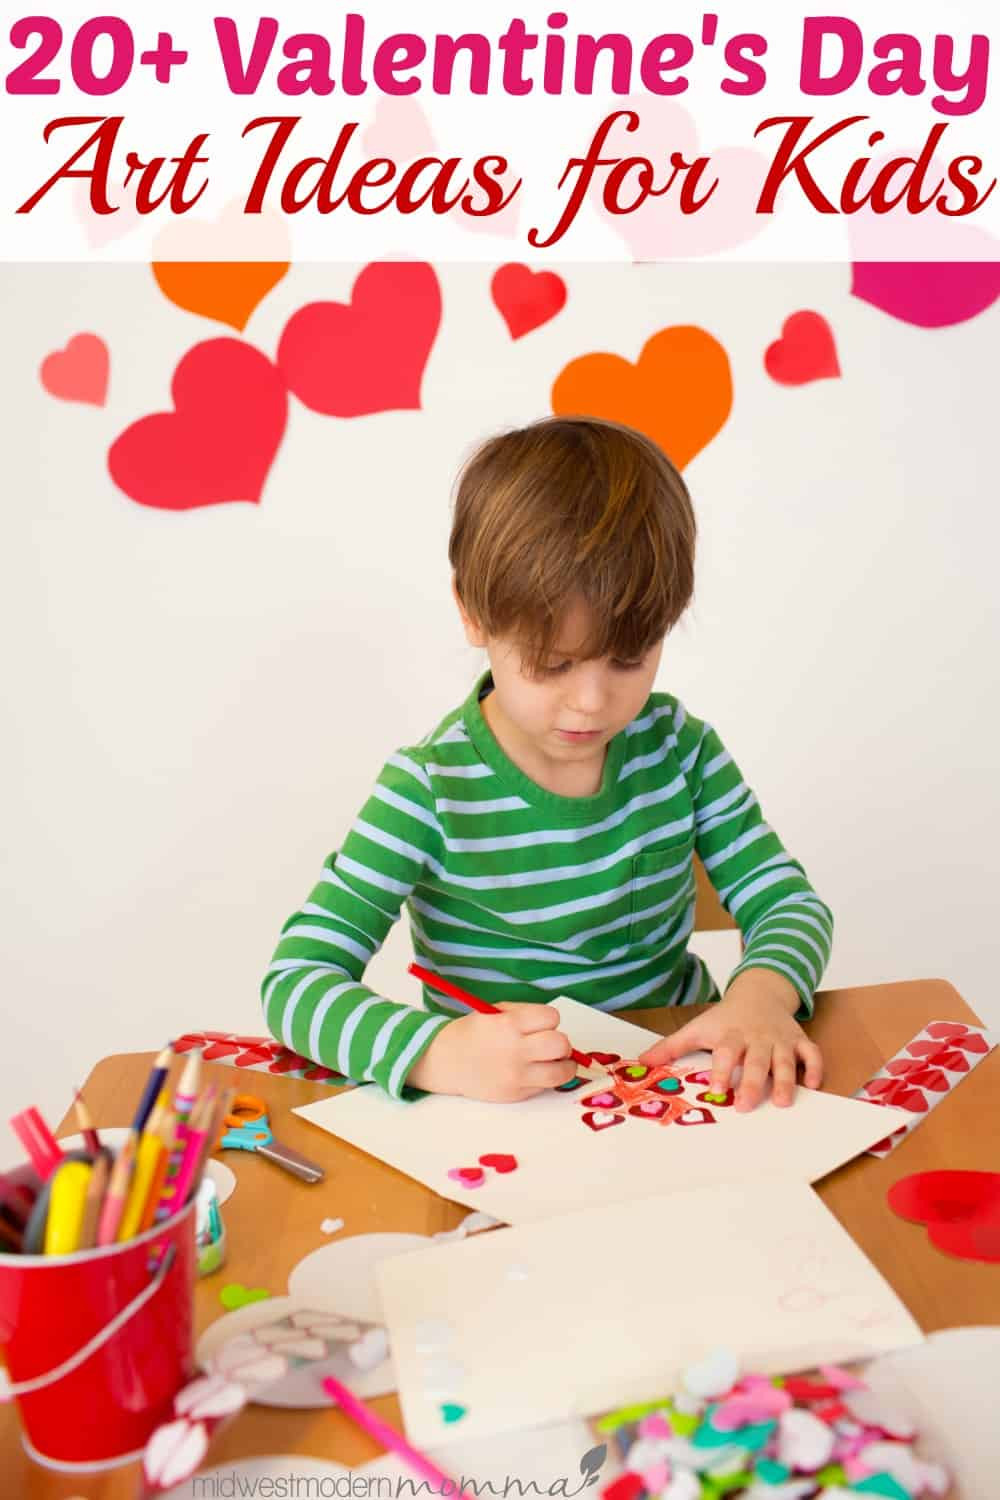 Valentines Day Painting Ideas
 20 Fun Valentine s Day Art Ideas for Kids